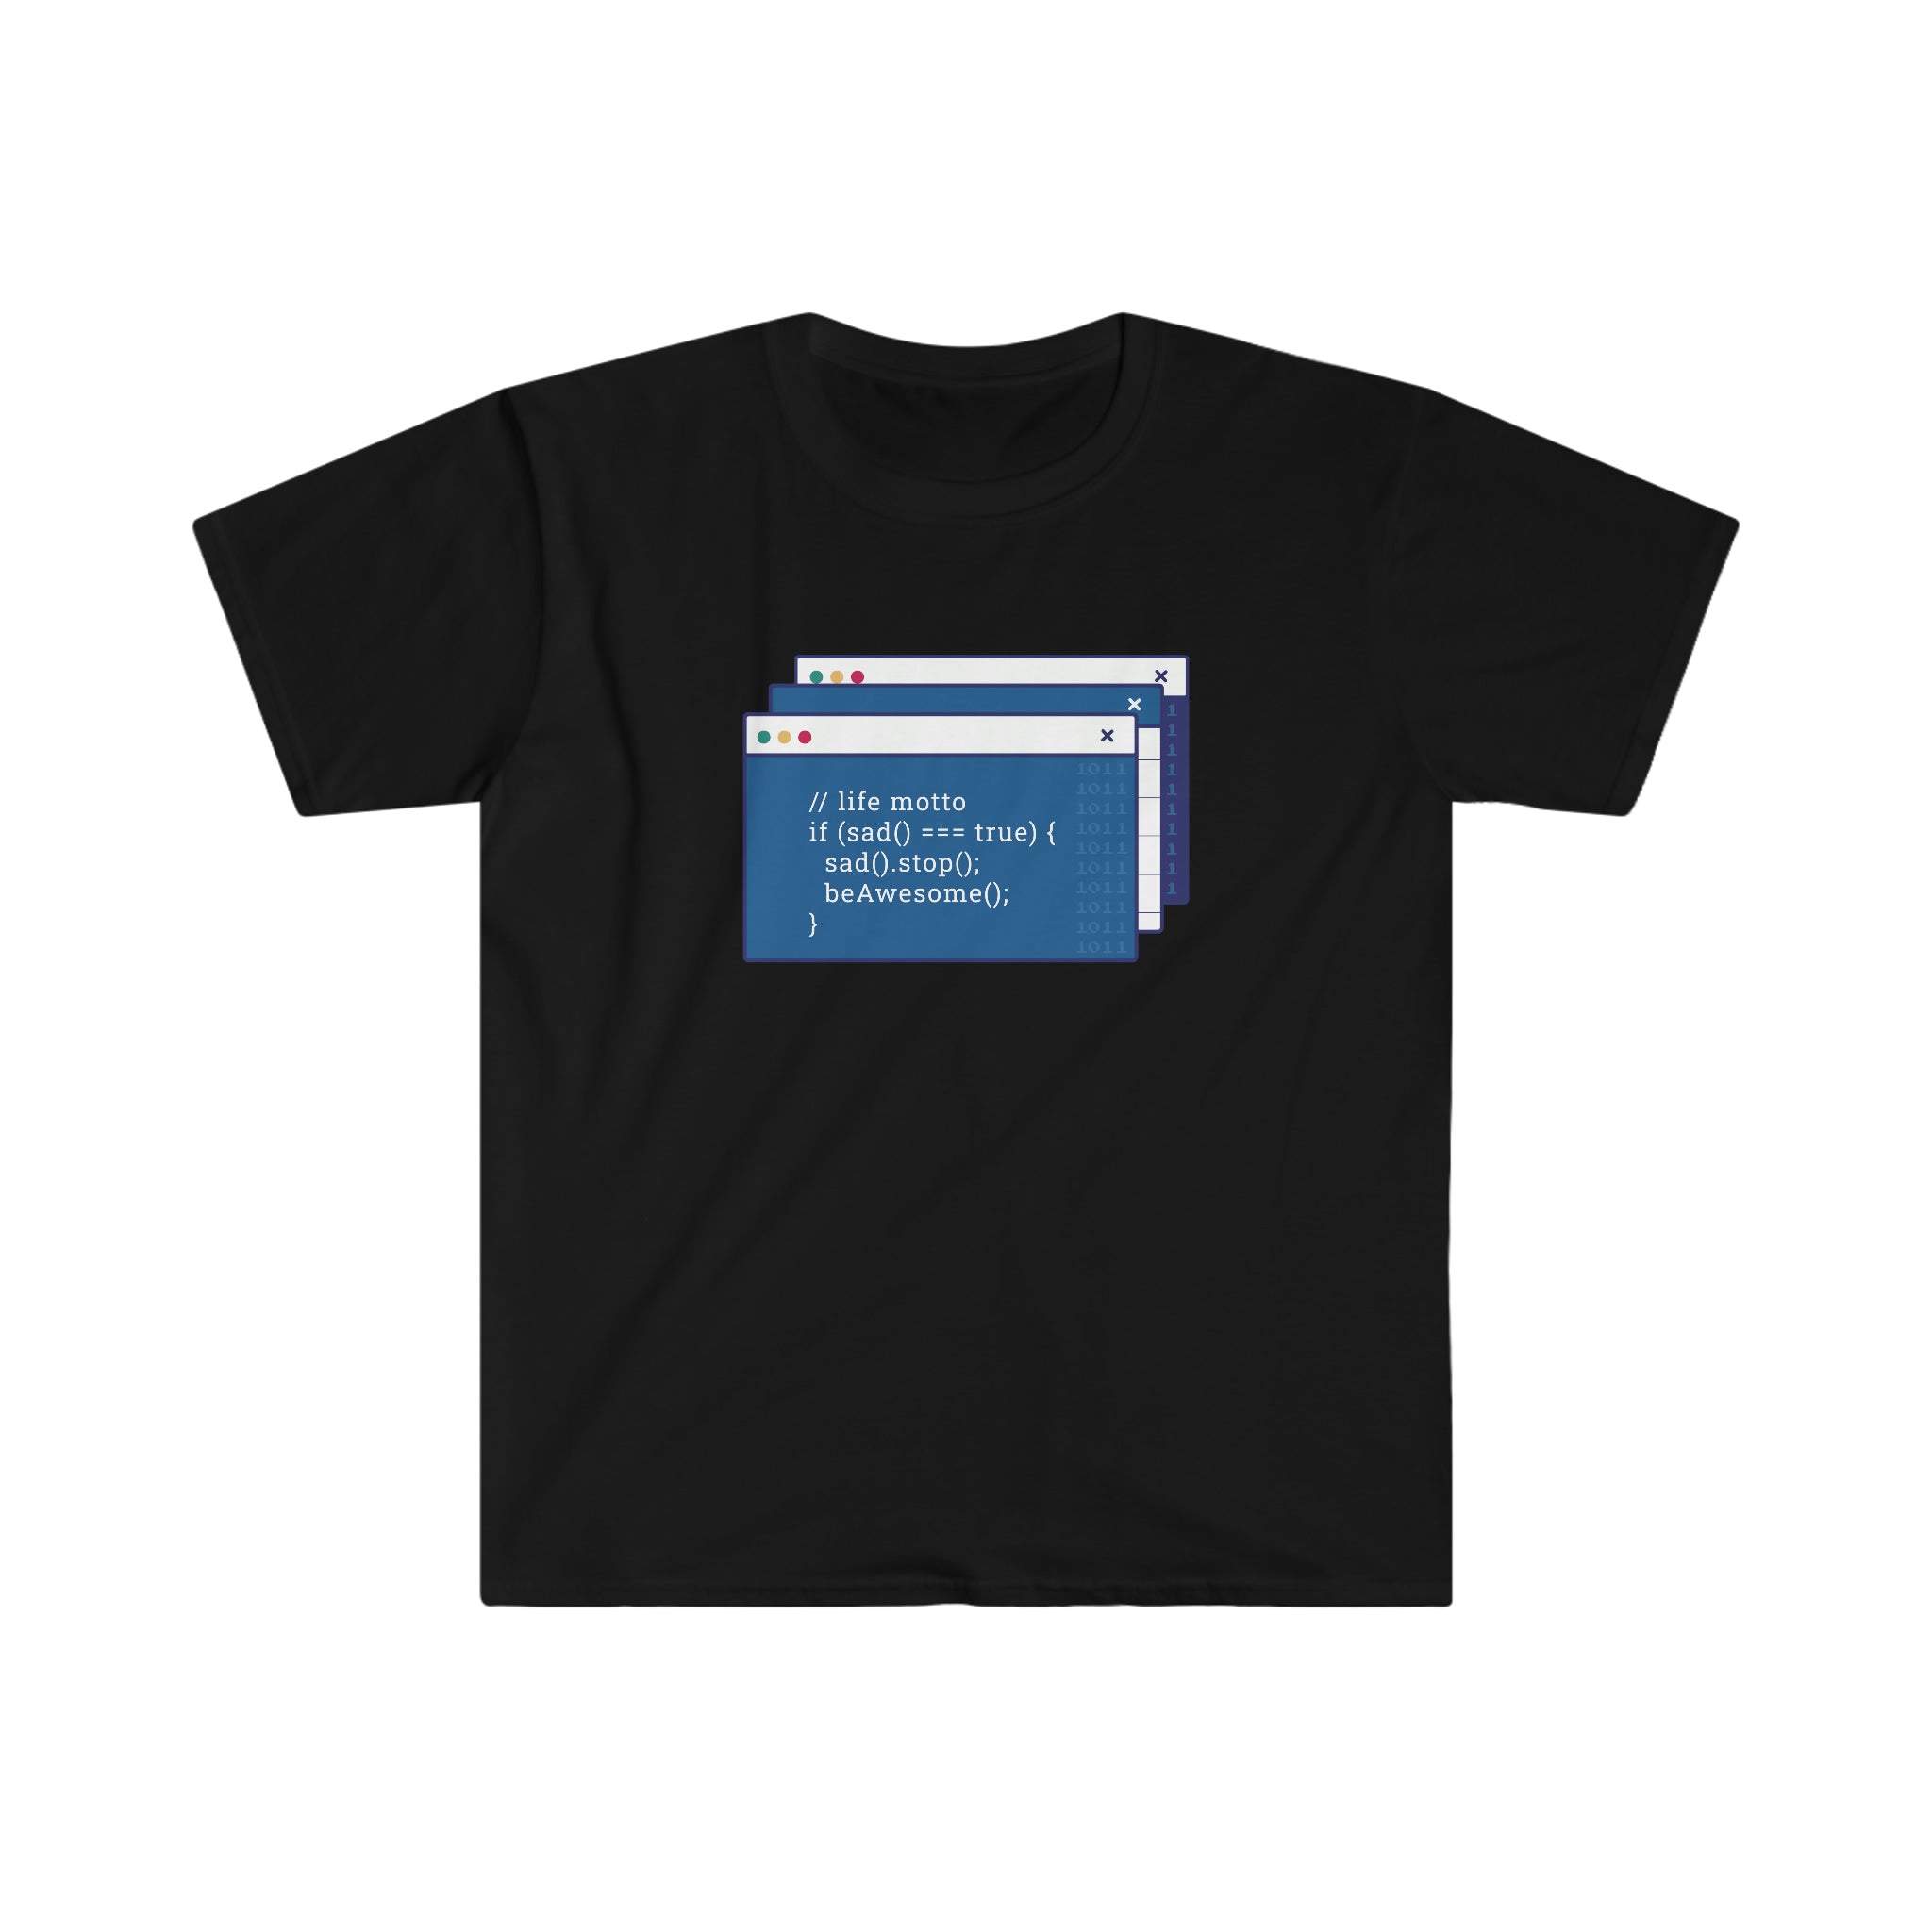 A Coding is Fun t-shirt with an image of a computer screen, made by Printify.